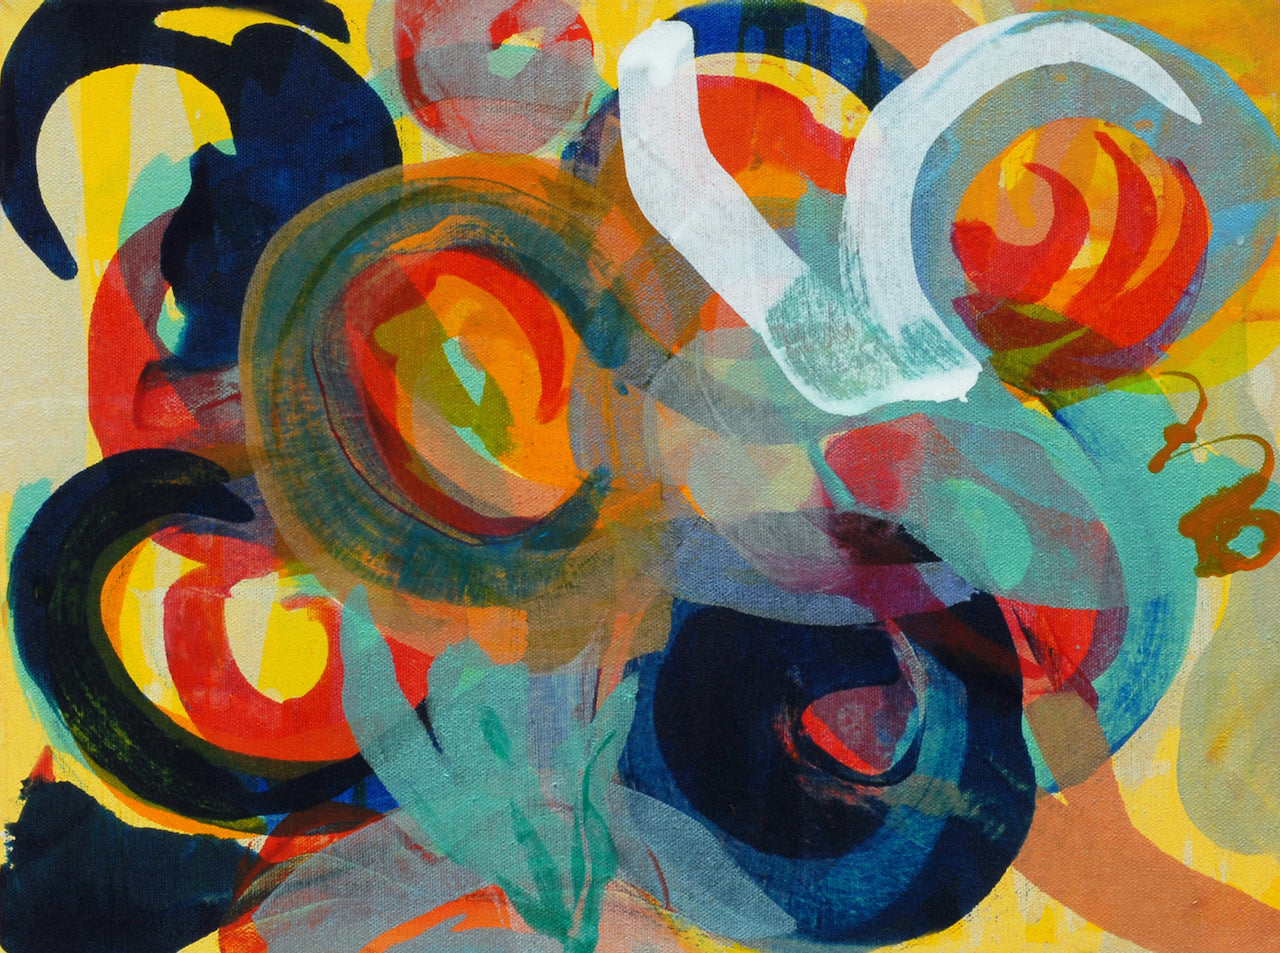 Abstract piece with coloured circles in black, green, oranges and yellows by artist Ella Carty.